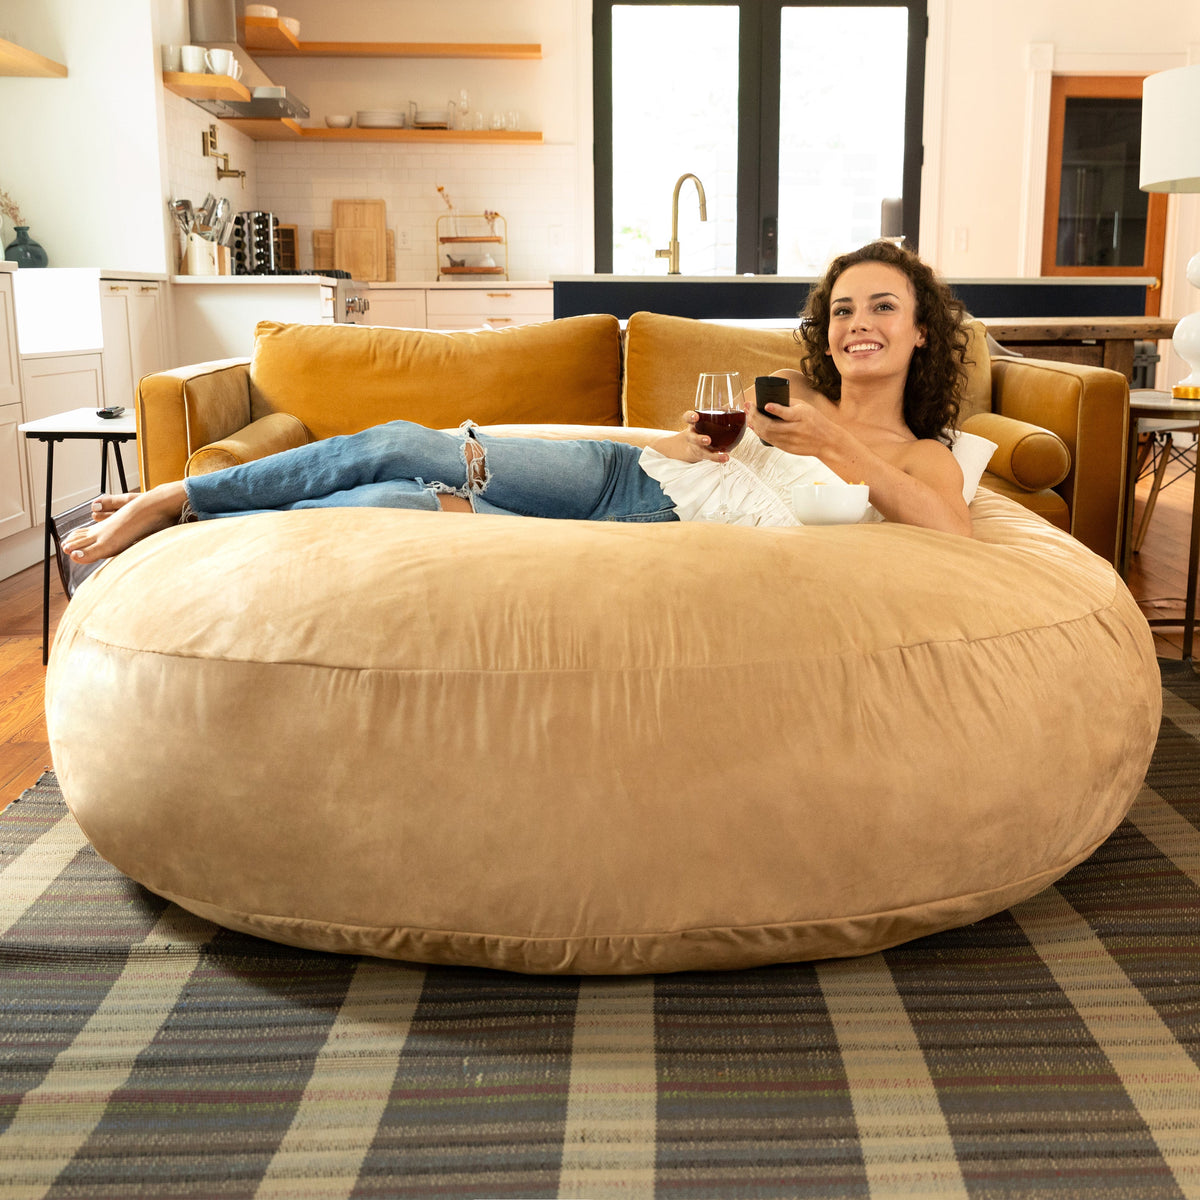 Cocoon Large Bean Bag Chair for Adults 6'